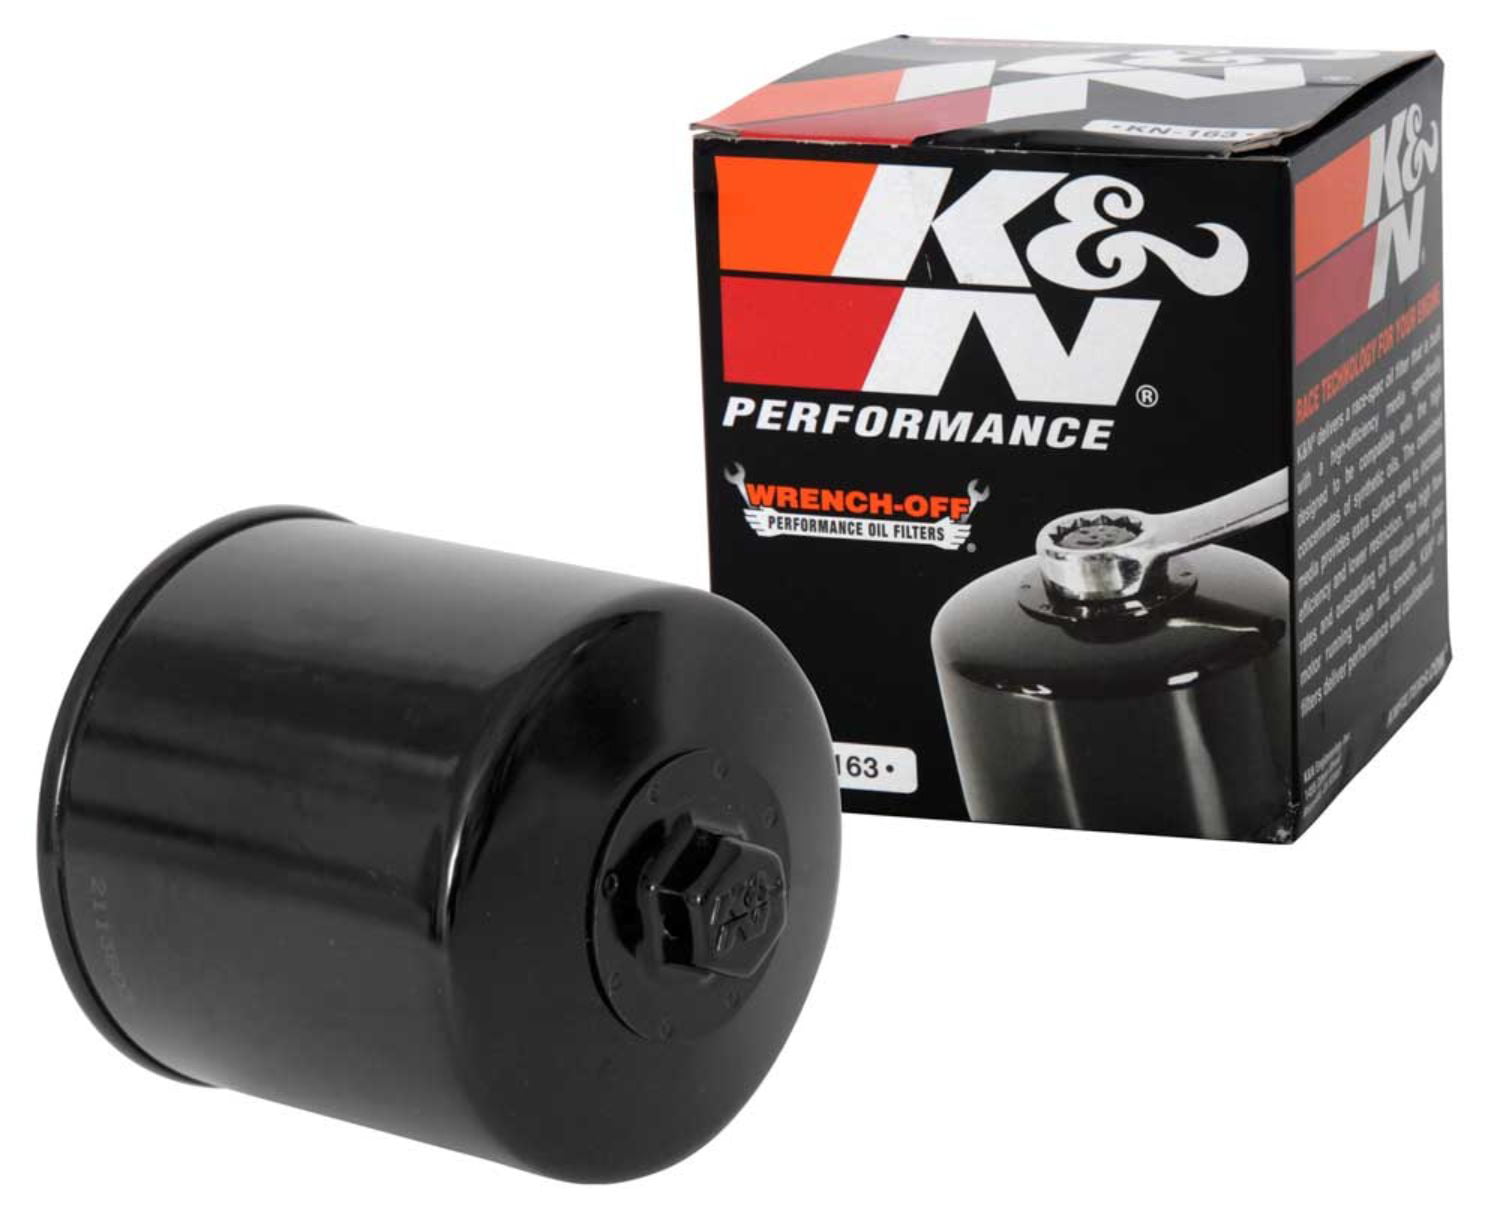 K&N Motorcycle Oil Filter: High Performance, Premium, Designed to be ...